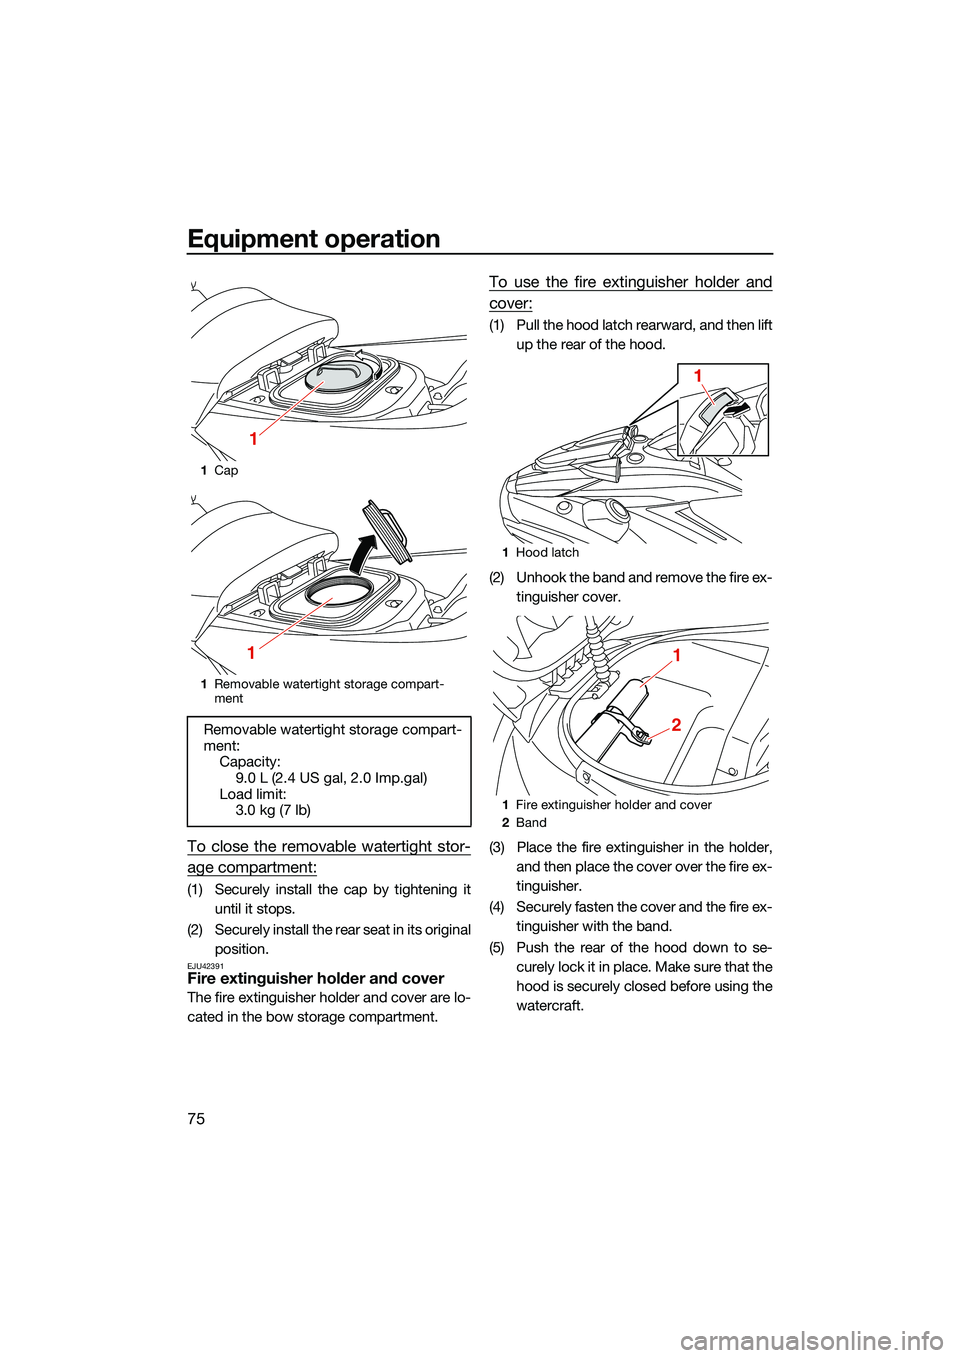 YAMAHA FX HO CRUISER 2022 Manual Online Equipment operation
75
To close the removable watertight stor-
age compartment:
(1) Securely install the cap by tightening ituntil it stops.
(2) Securely install the rear seat in its original position